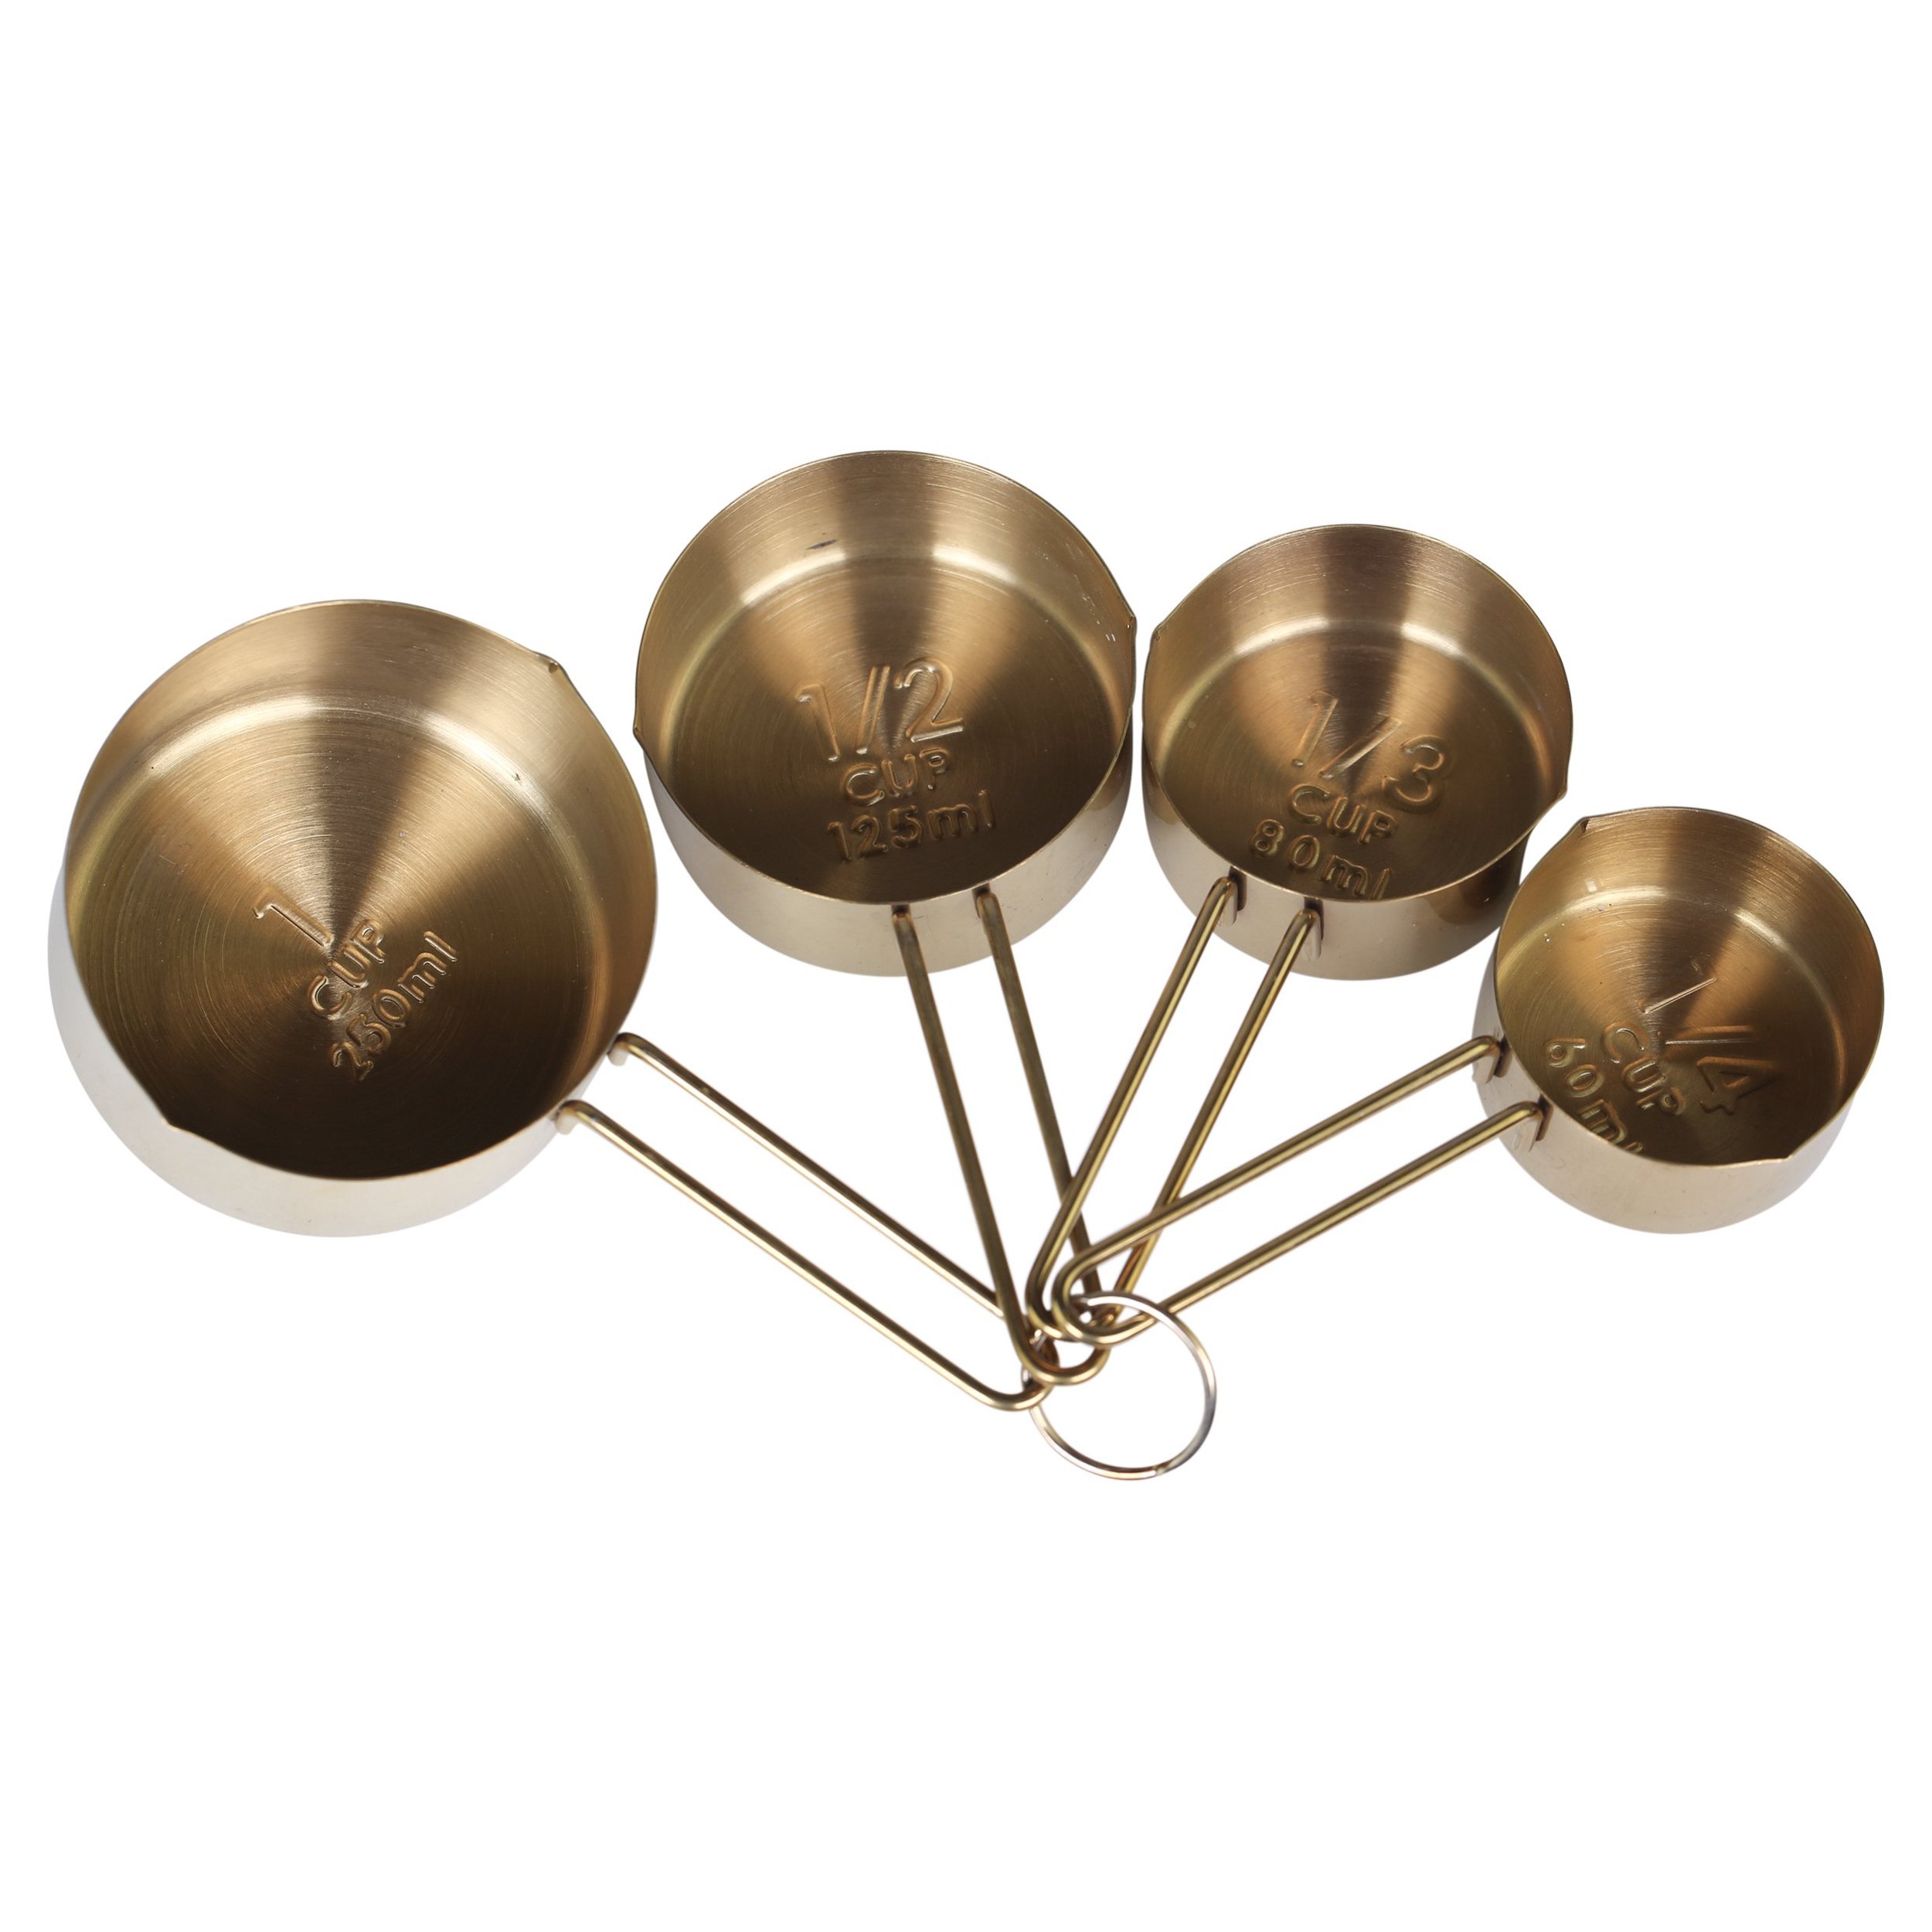 Chic Antique Brass Measuring Cups